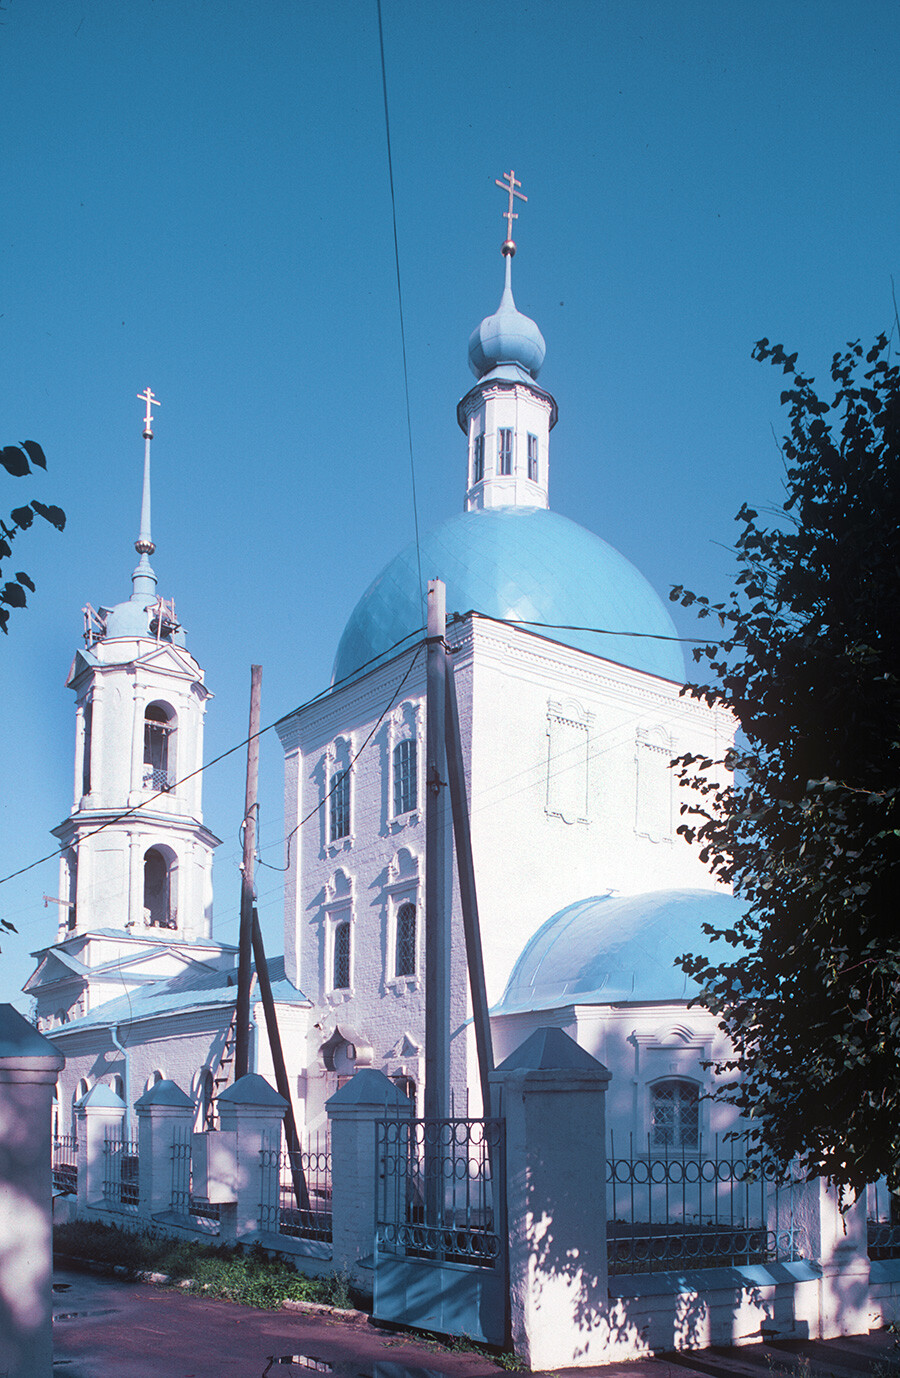 Zaraisk. Church of the Annunciation, southeast view. Begun in 1777, consecrated at beginning of 19th century. Bell tower added in 1825. August 22, 2003